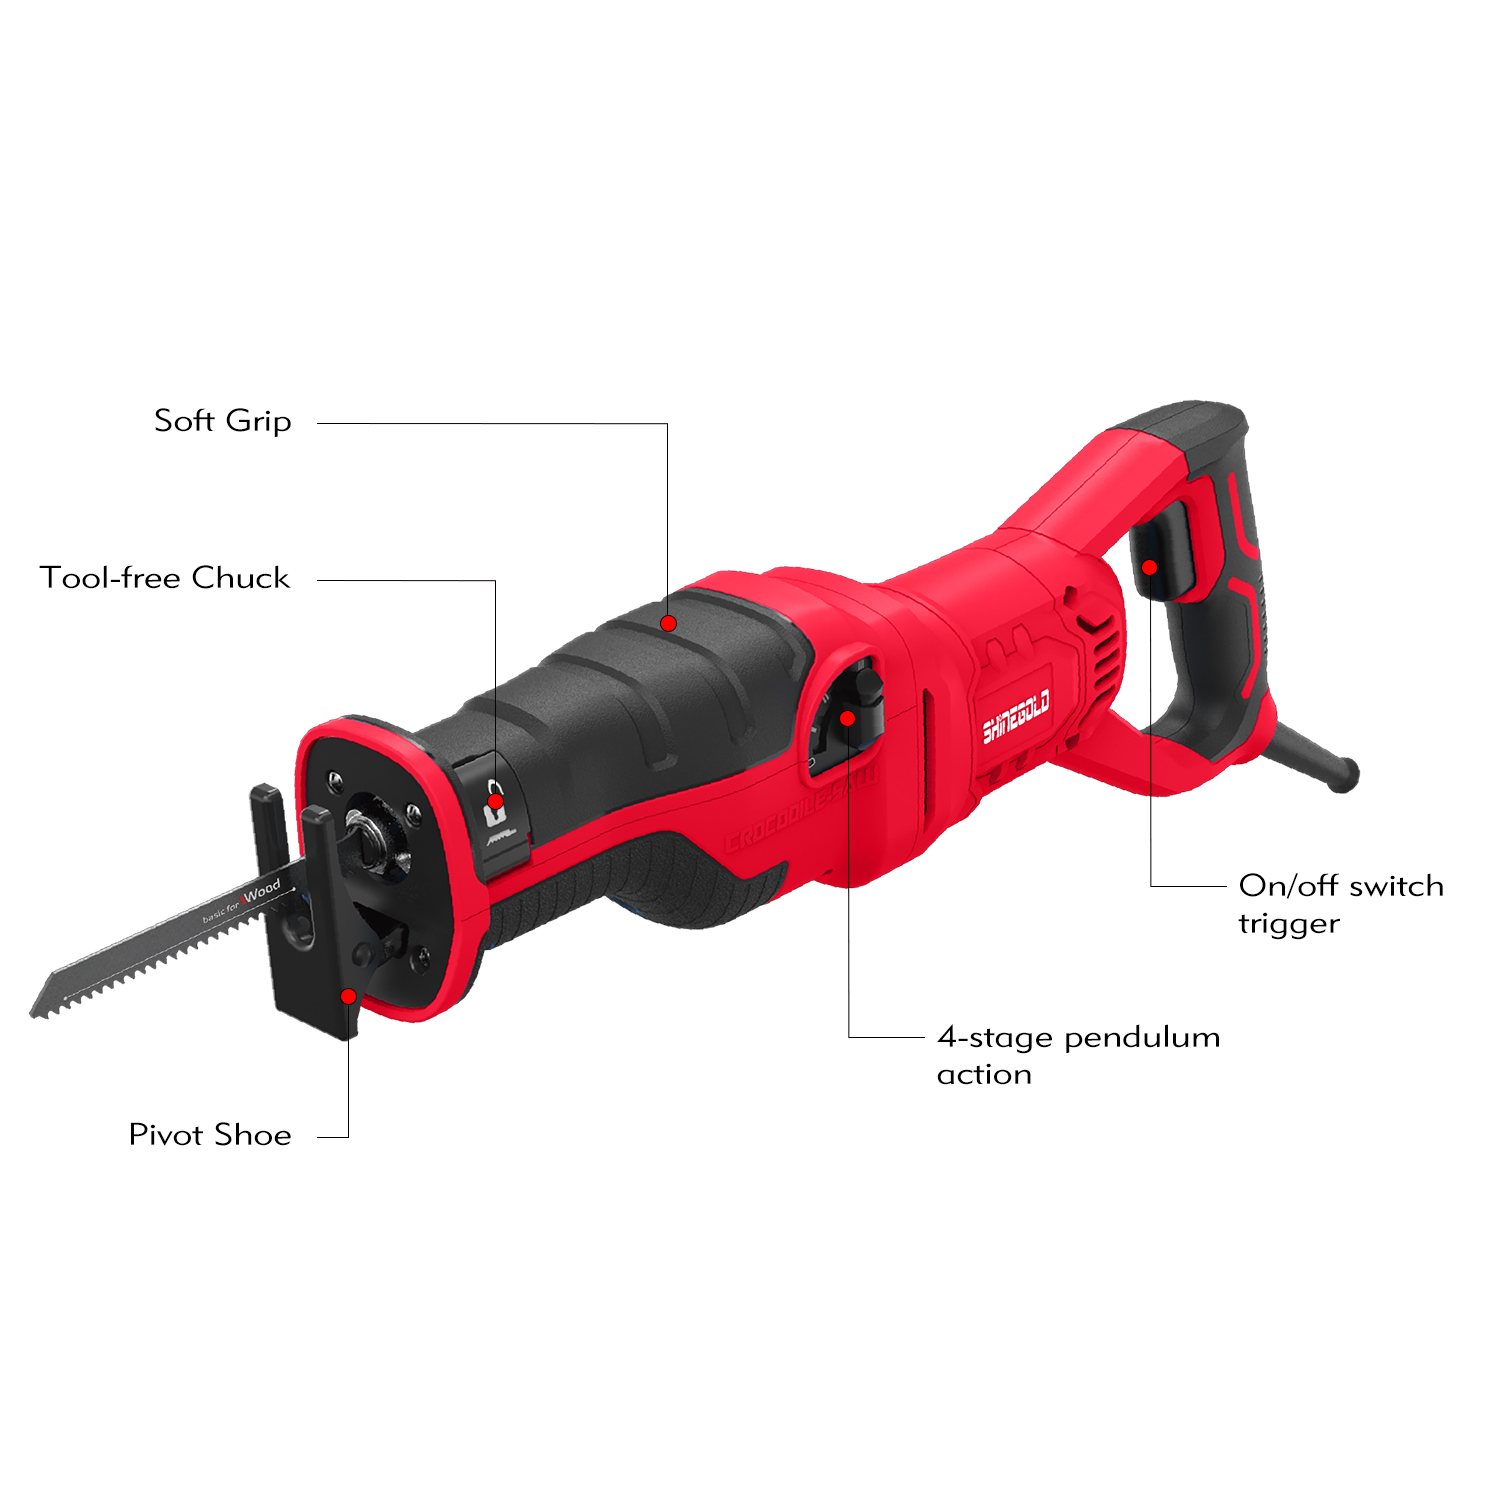 Professional 1200W Reciprocating Saw Electric Power Tool Machine with Variable Speed